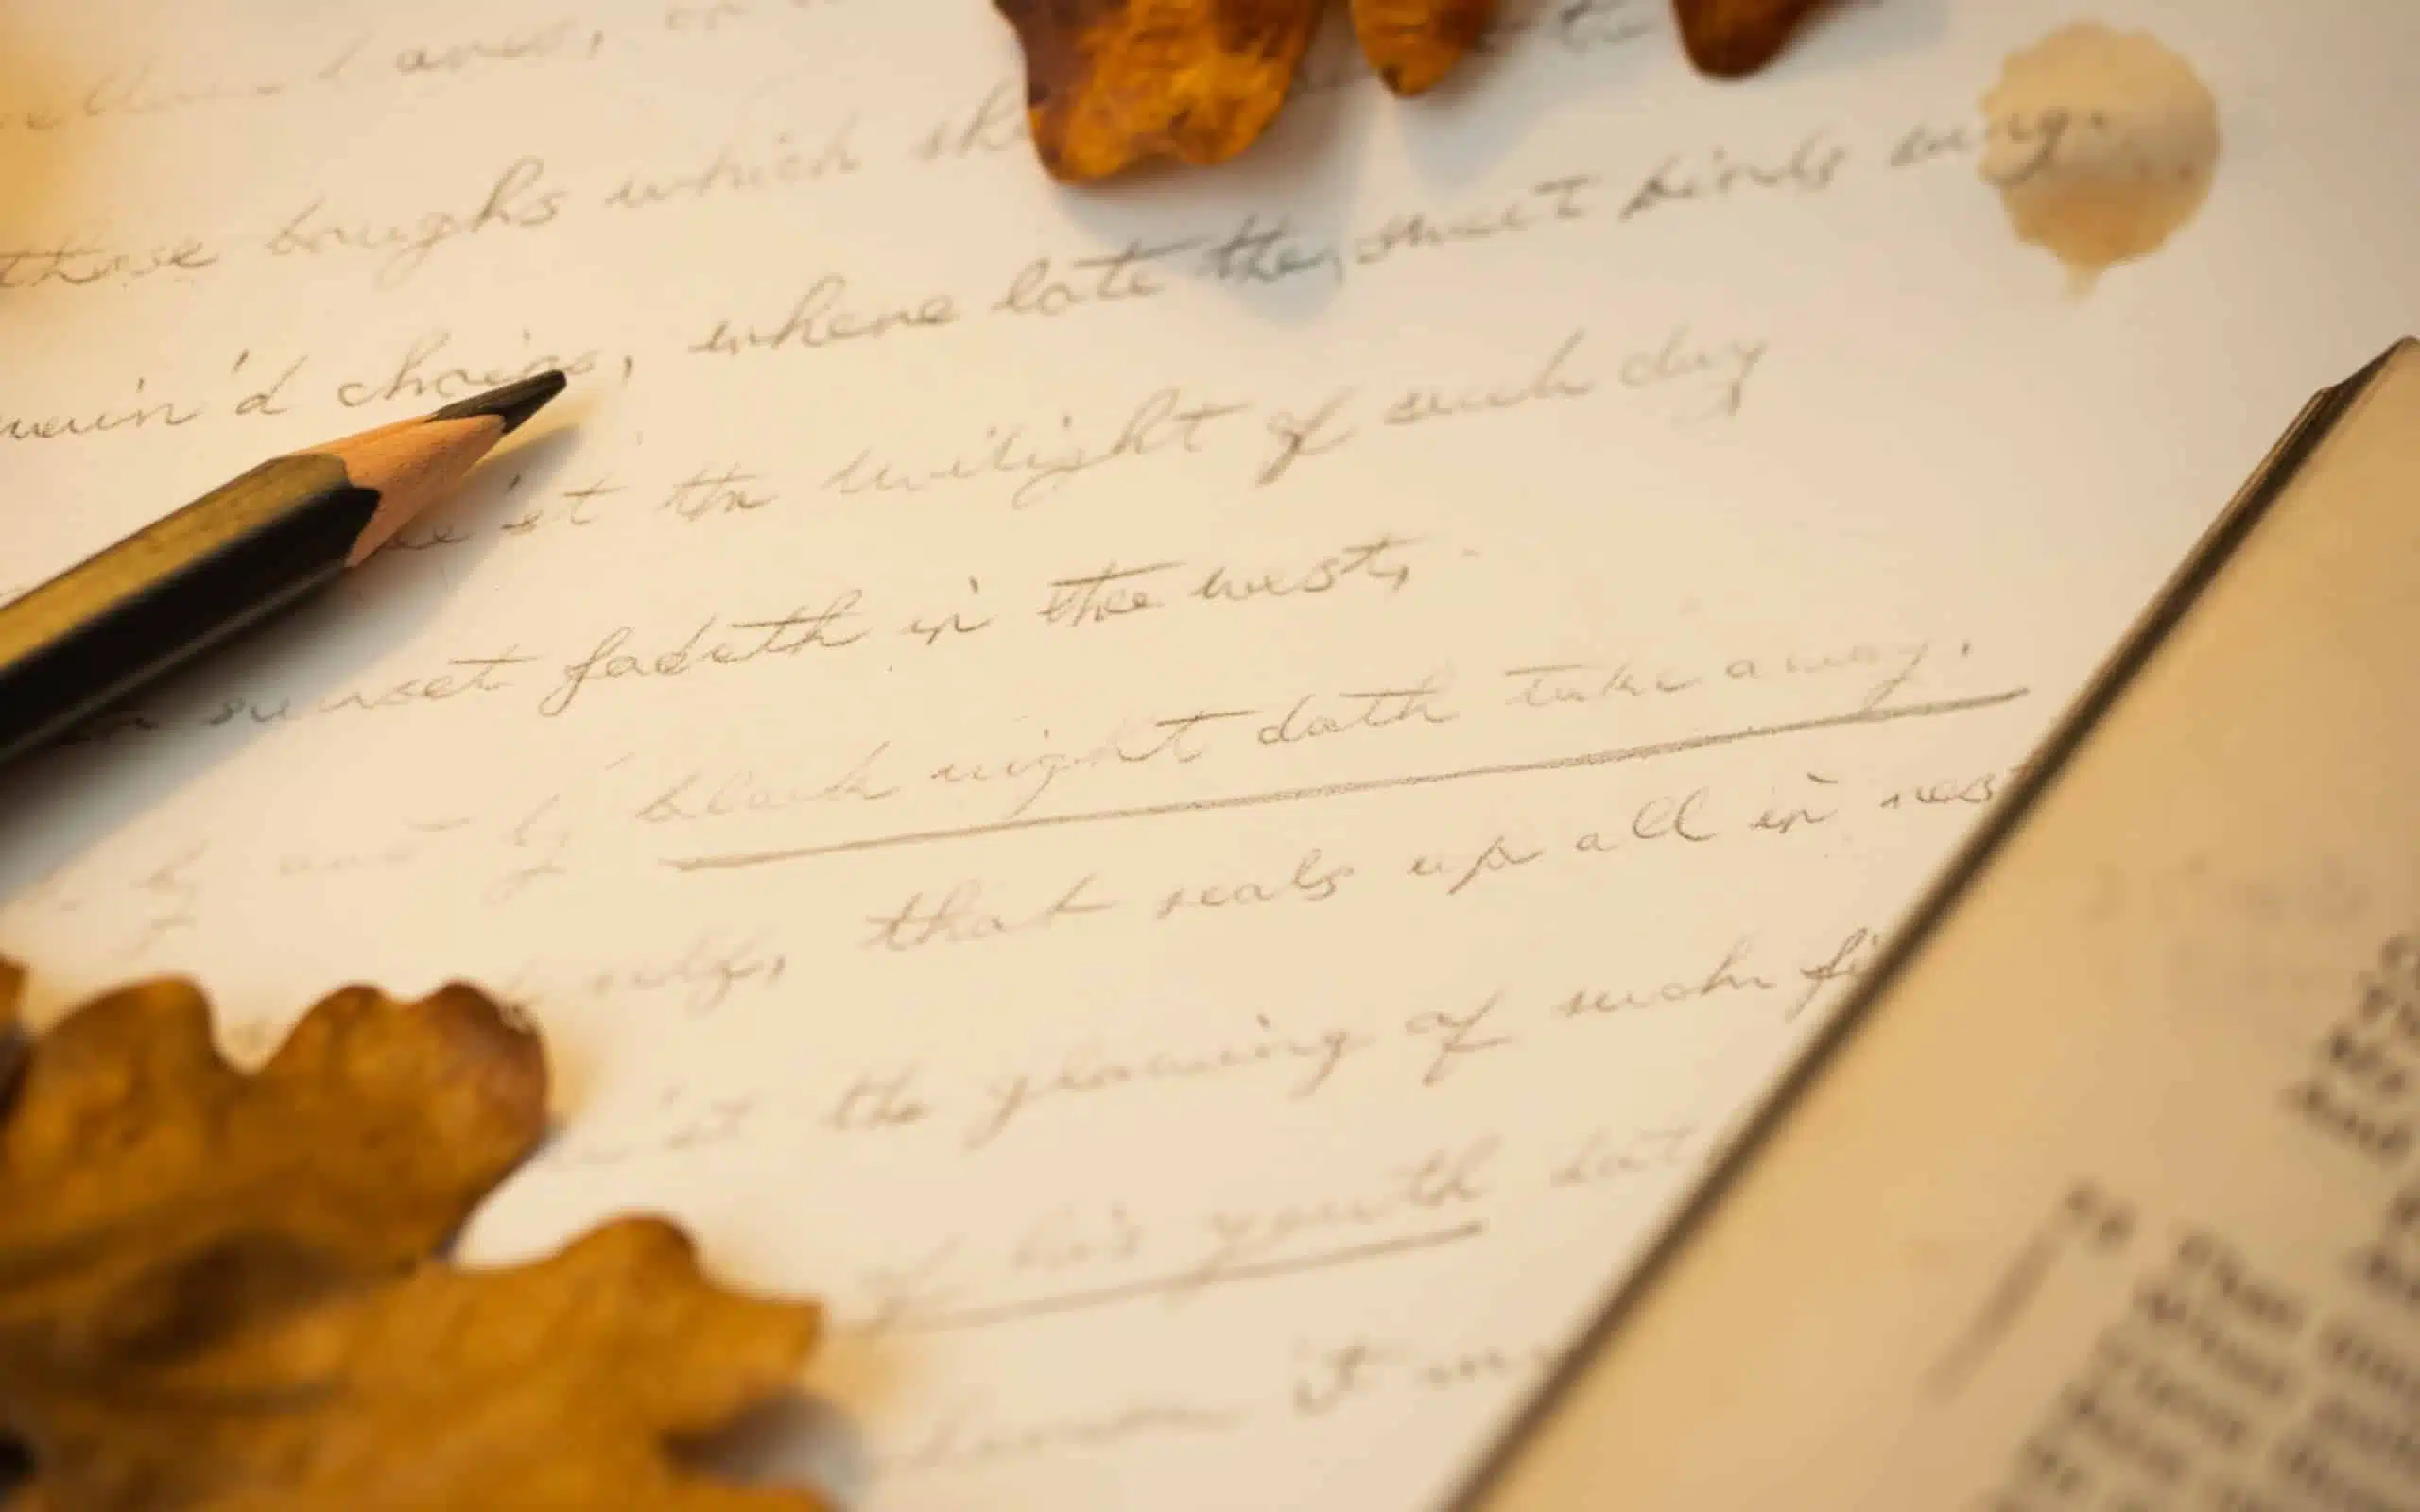 Vintage paper with Shakespeare sonnet, autumn leaves, and a pen.